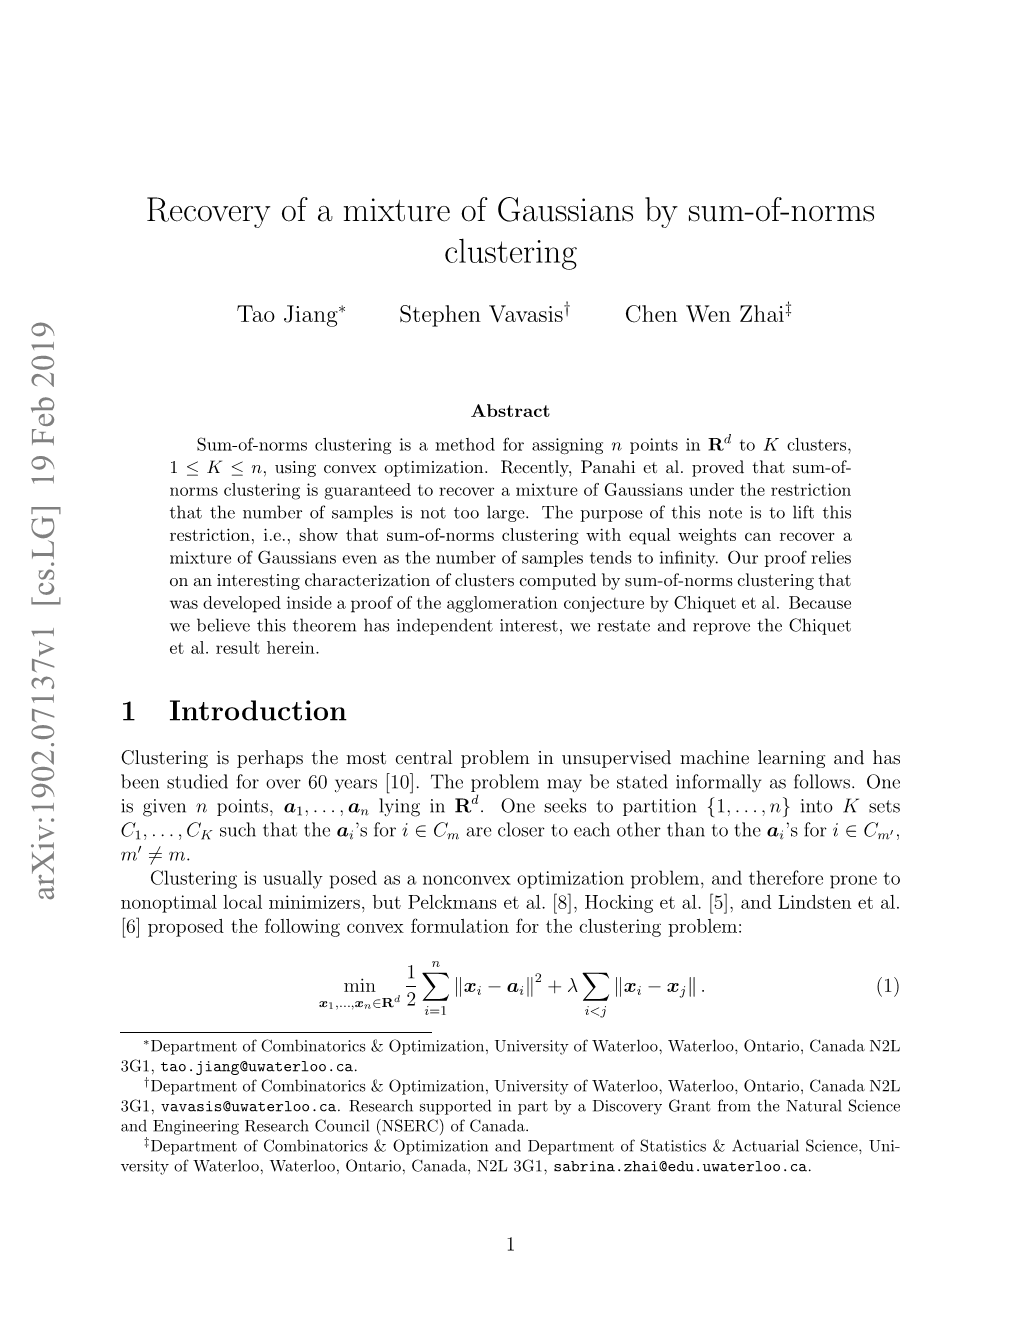 Recovery of a Mixture of Gaussians by Sum-Of-Norms Clustering